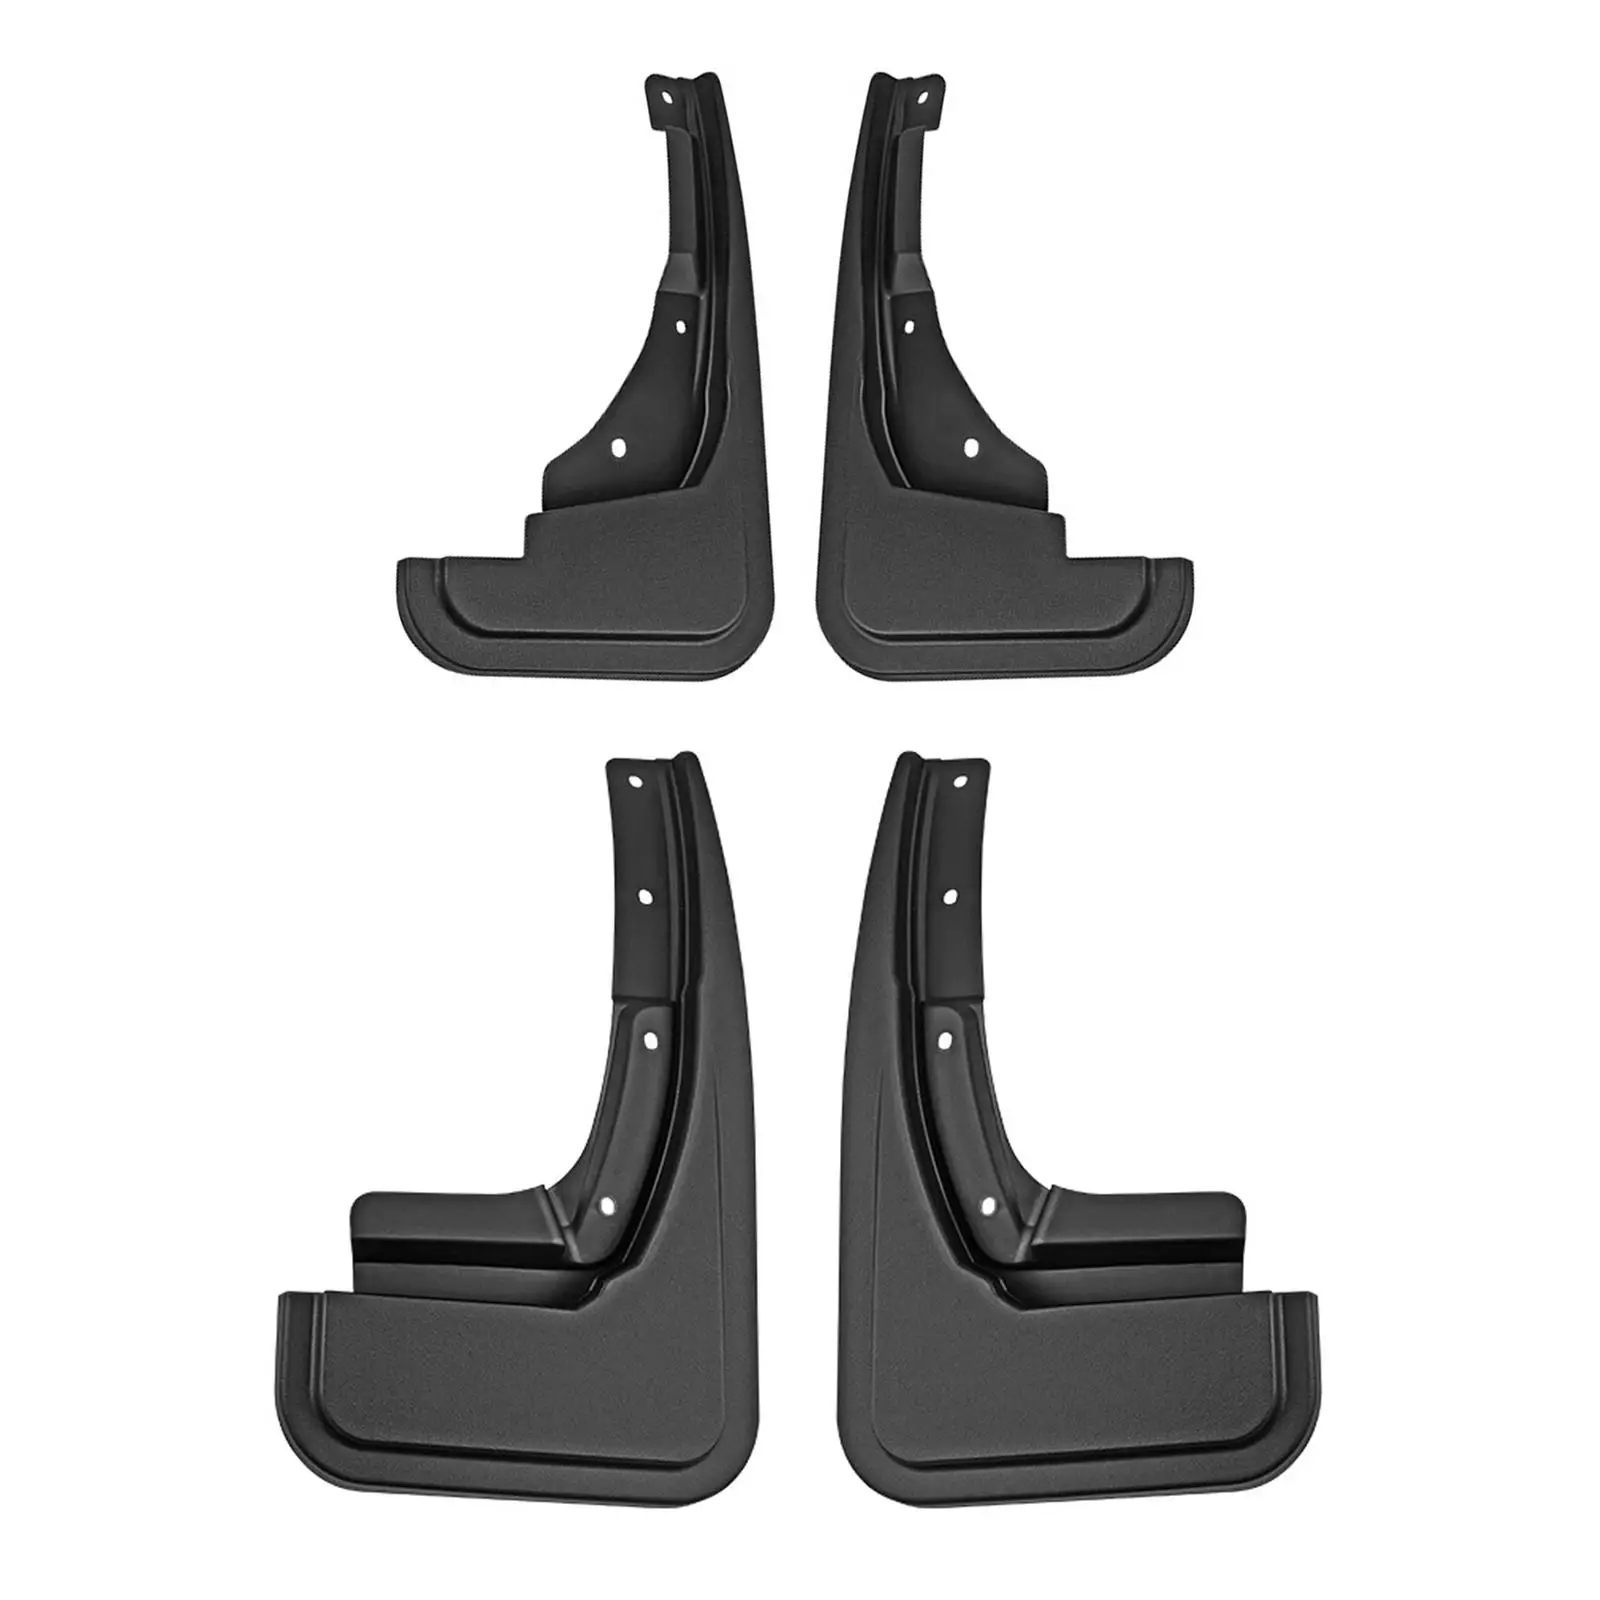 4 Pieces Front and Rear Mud Flaps Mudflaps Splash Guards Mudguard for Ford 2023 Maverick Easily to Install Auto Accessories